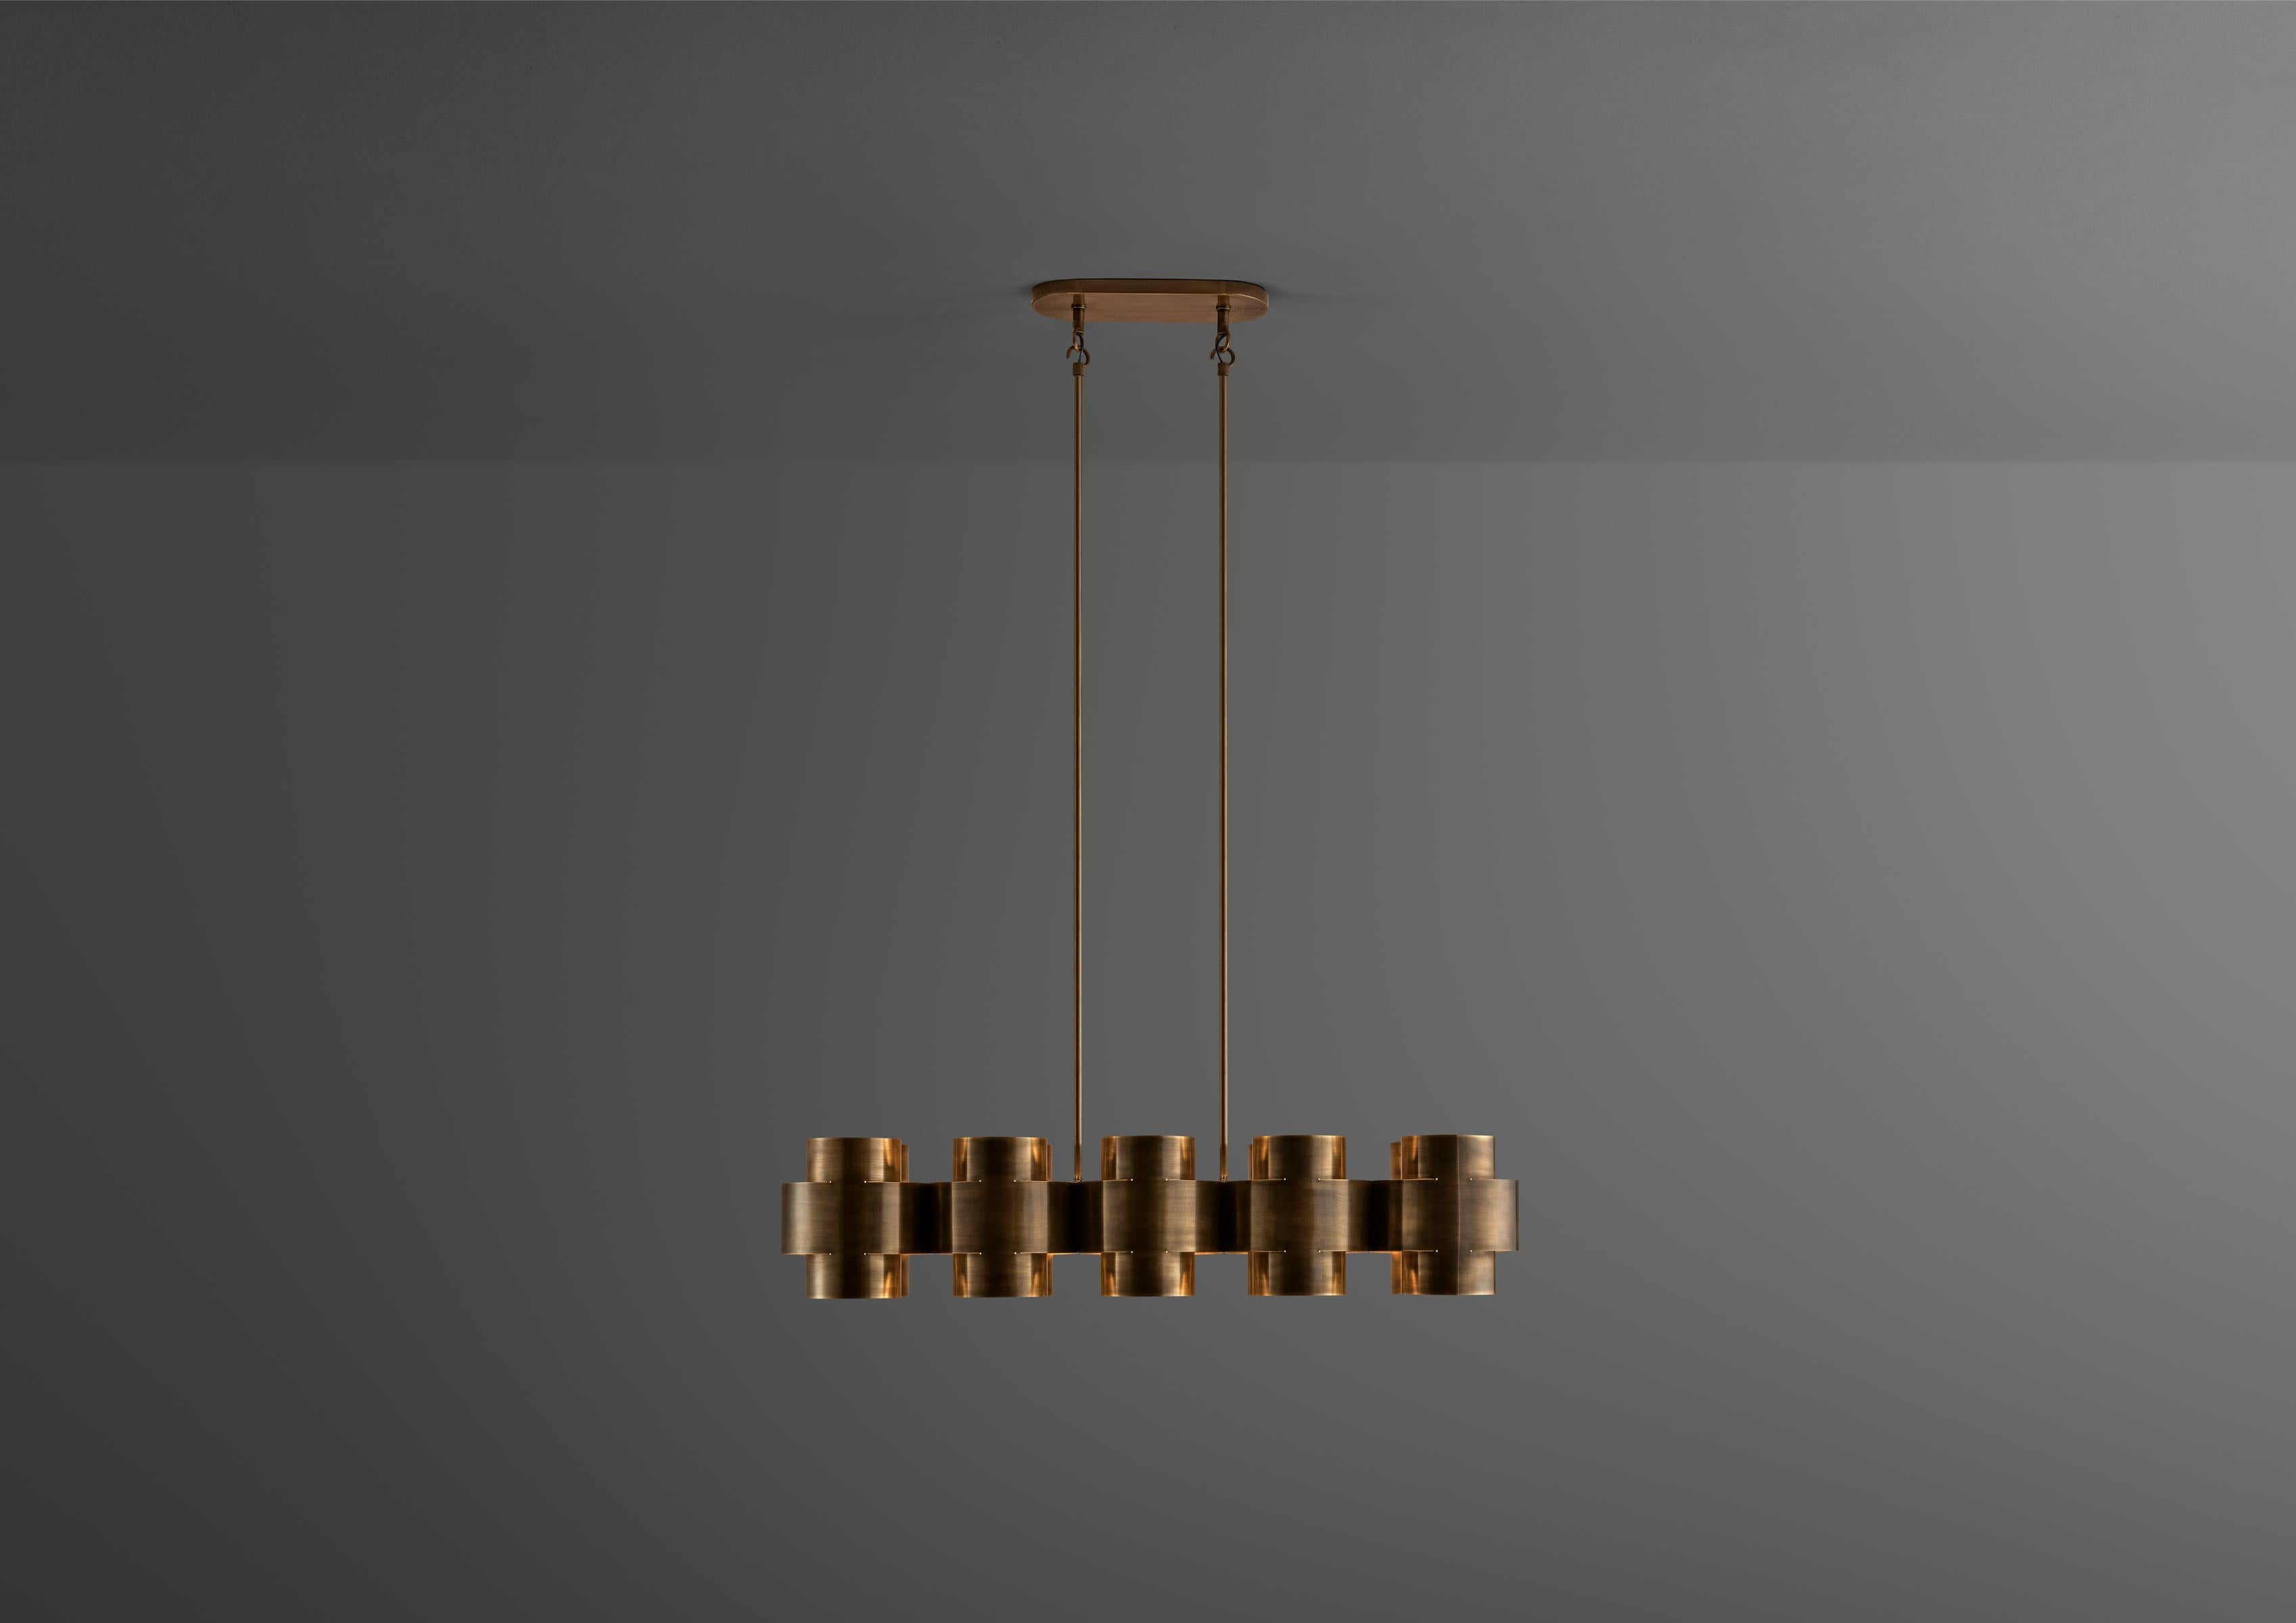 Aged Brass Plus Ten Chandelier by Paul Matter
Dimensions: W 120 x D 33 x H 53 cm (Minimun drop lenght)
Materials: Aged Brass
Drop Length/Height can be customized. Please contact us for any request.

10 Type E27 / E26 Medium Base
3W - 5W LED, Warm